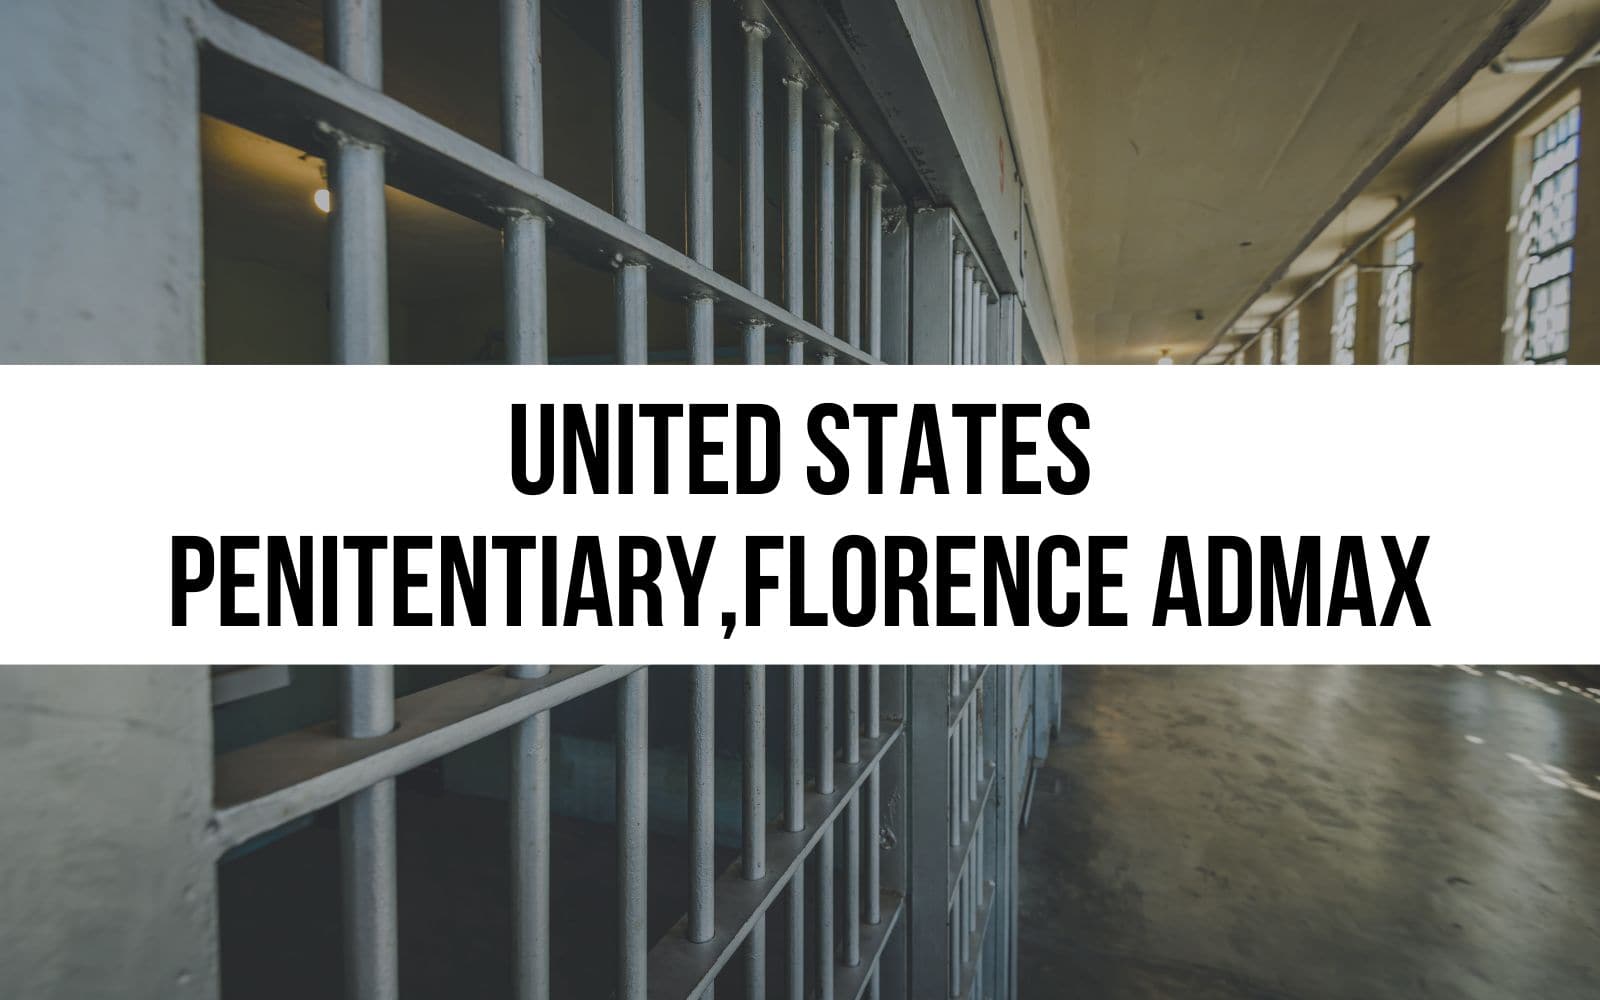 United States Penitentiary, Florence ADMAX